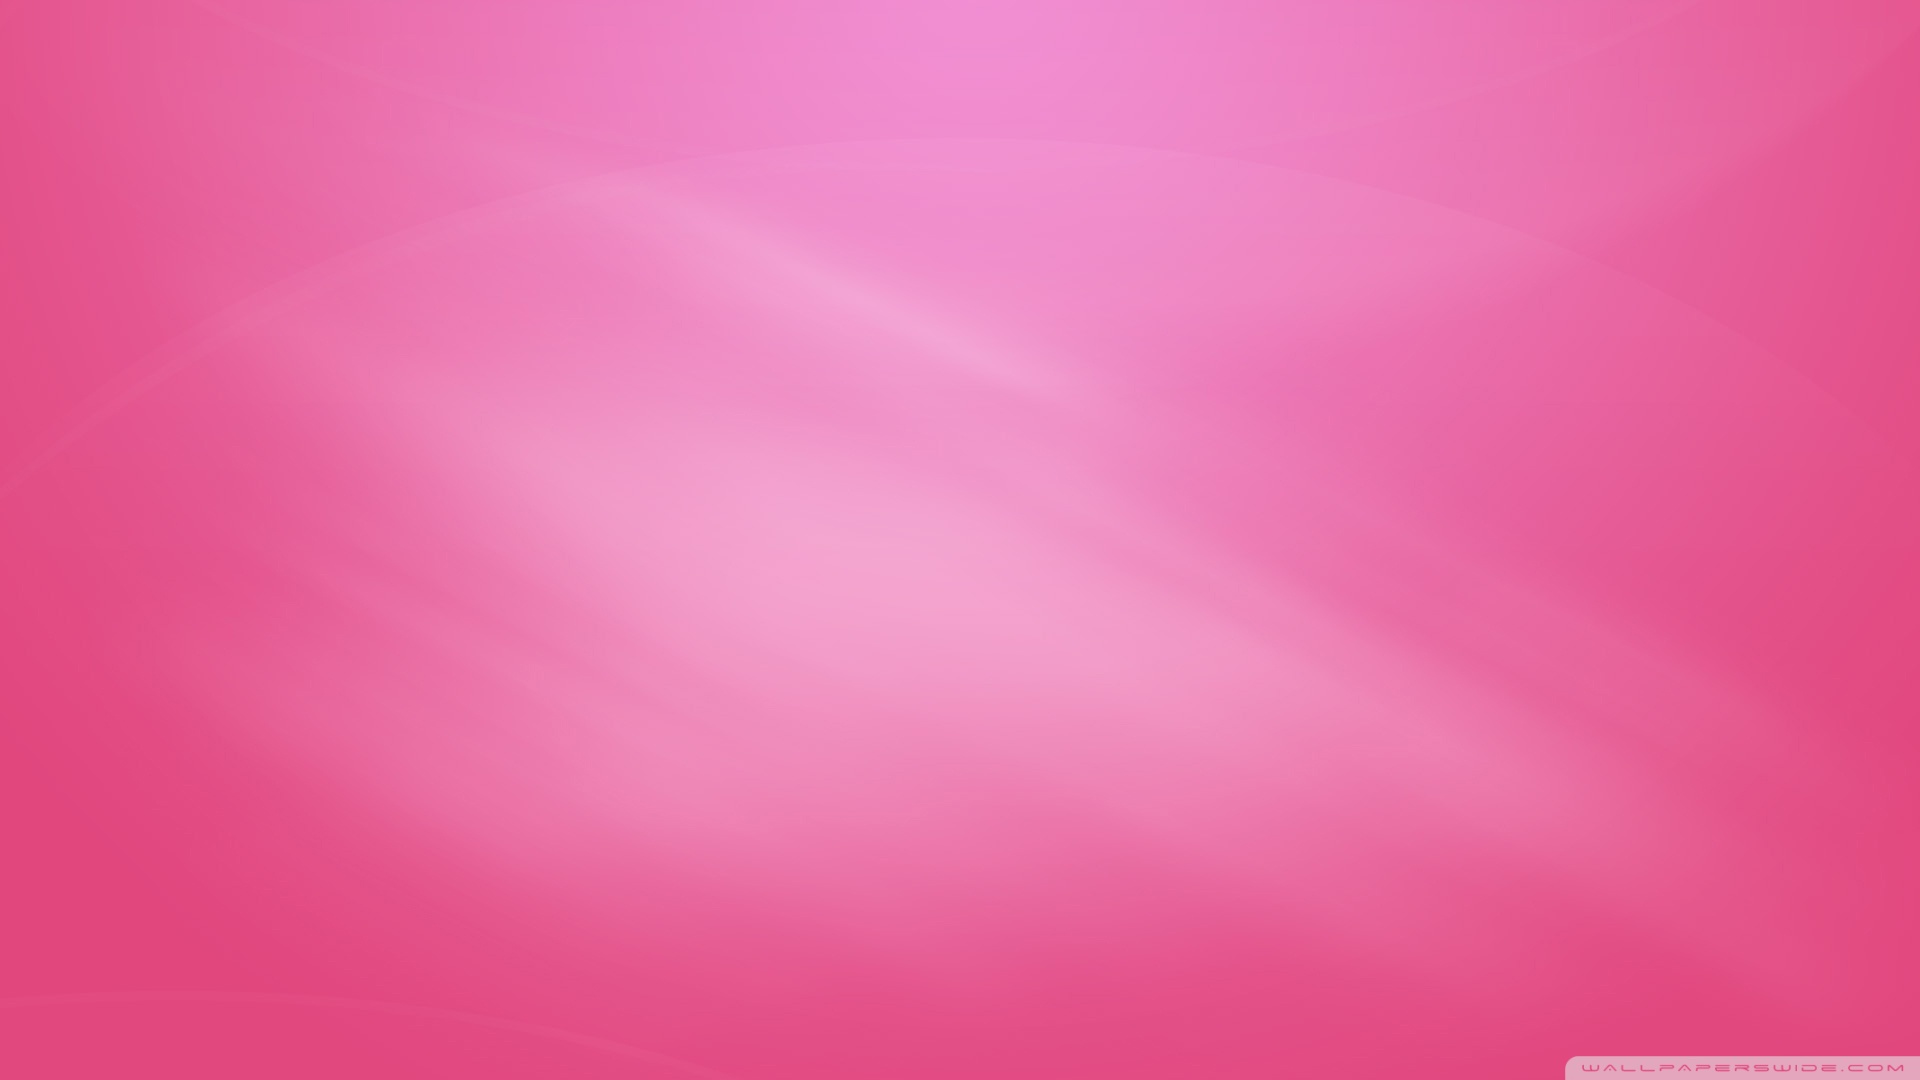 35 High Definition Pink Wallpapers Backgrounds For Free HD Wallpapers Download Free Map Images Wallpaper [wallpaper684.blogspot.com]